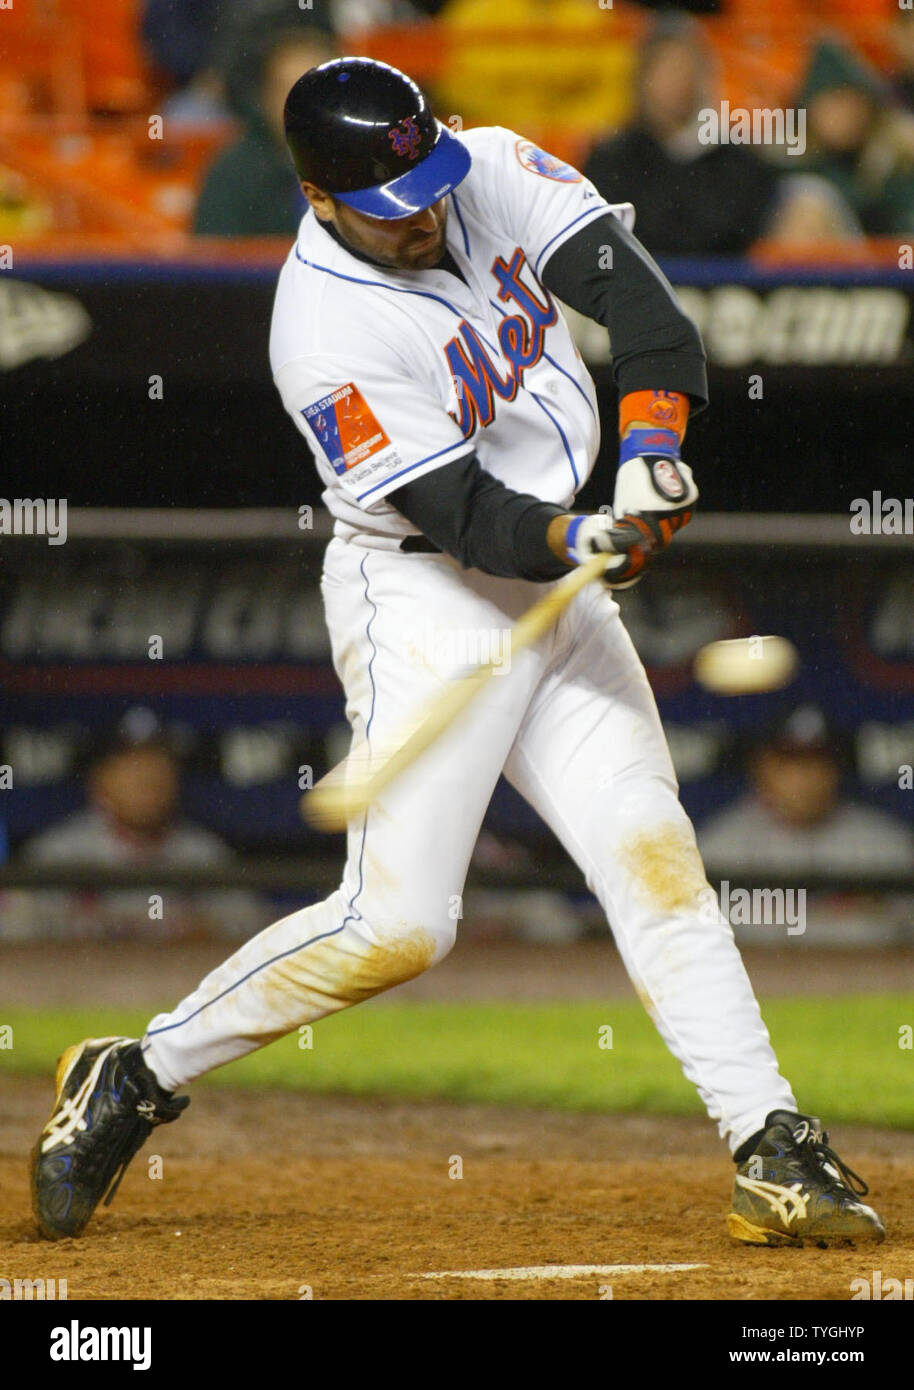 Mike Piazza New York Mets 2004 Batting Action 16 x 20 Photo